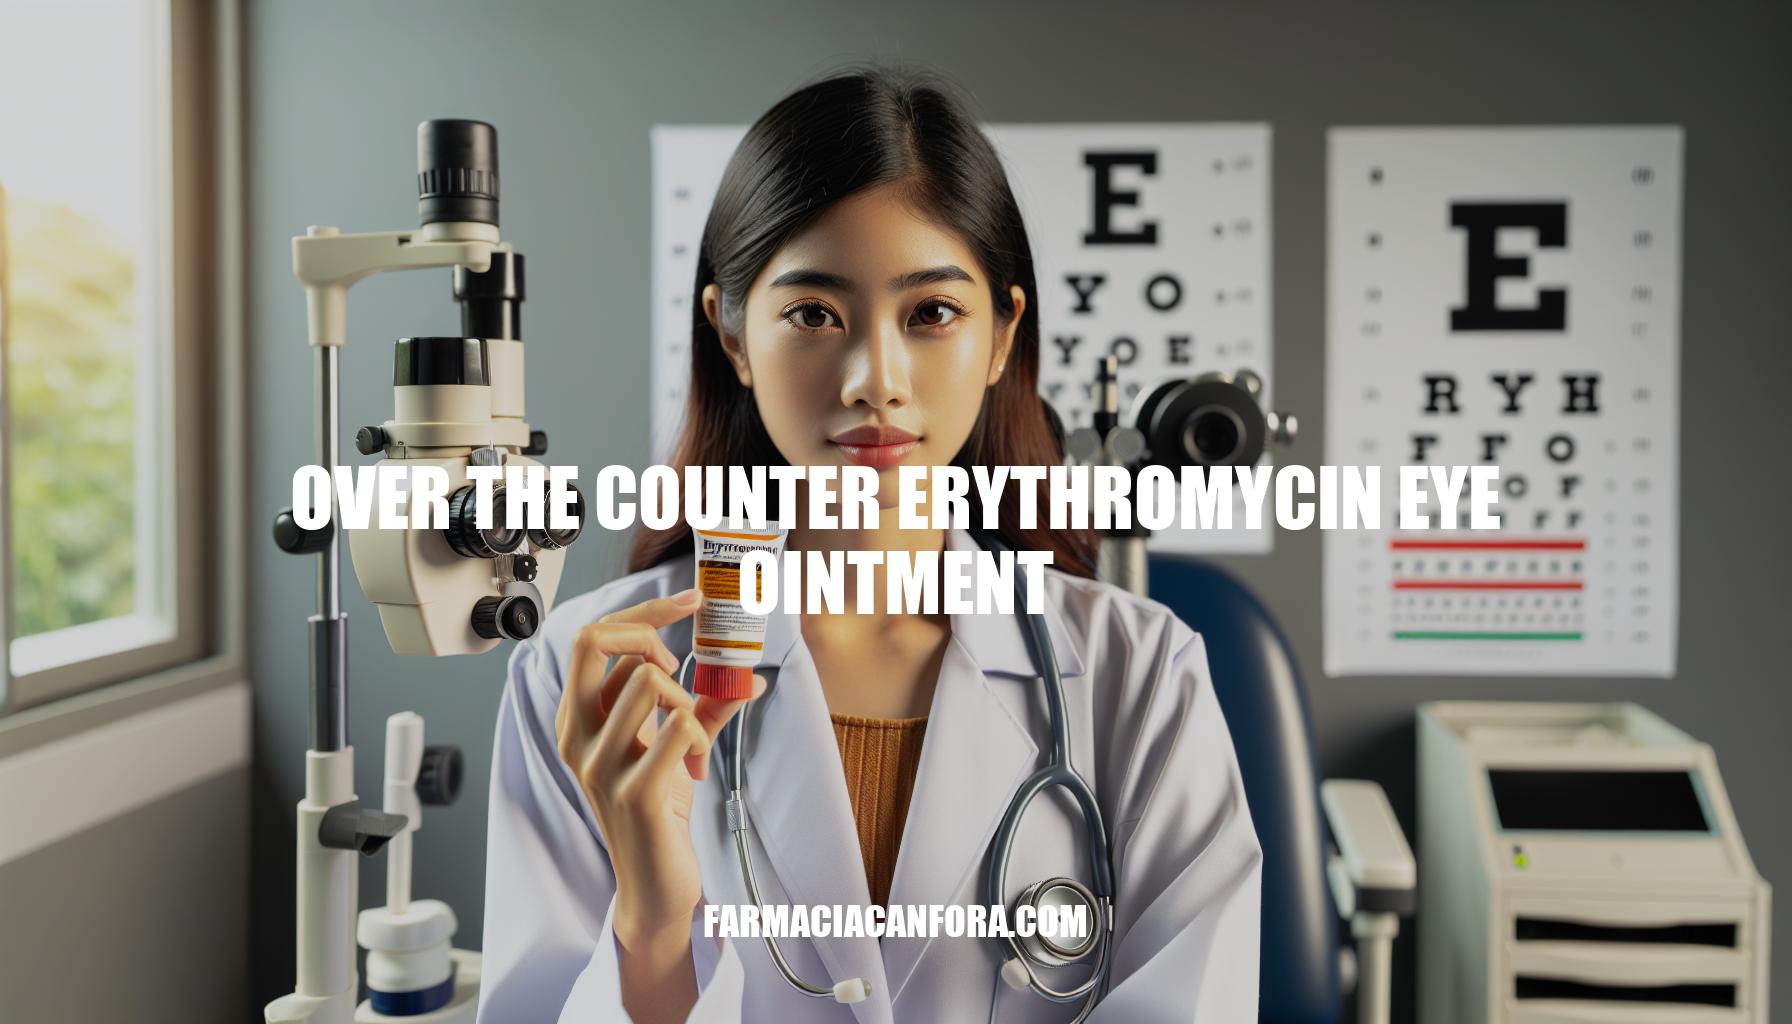 The Ultimate Guide to Over the Counter Erythromycin Eye Ointment